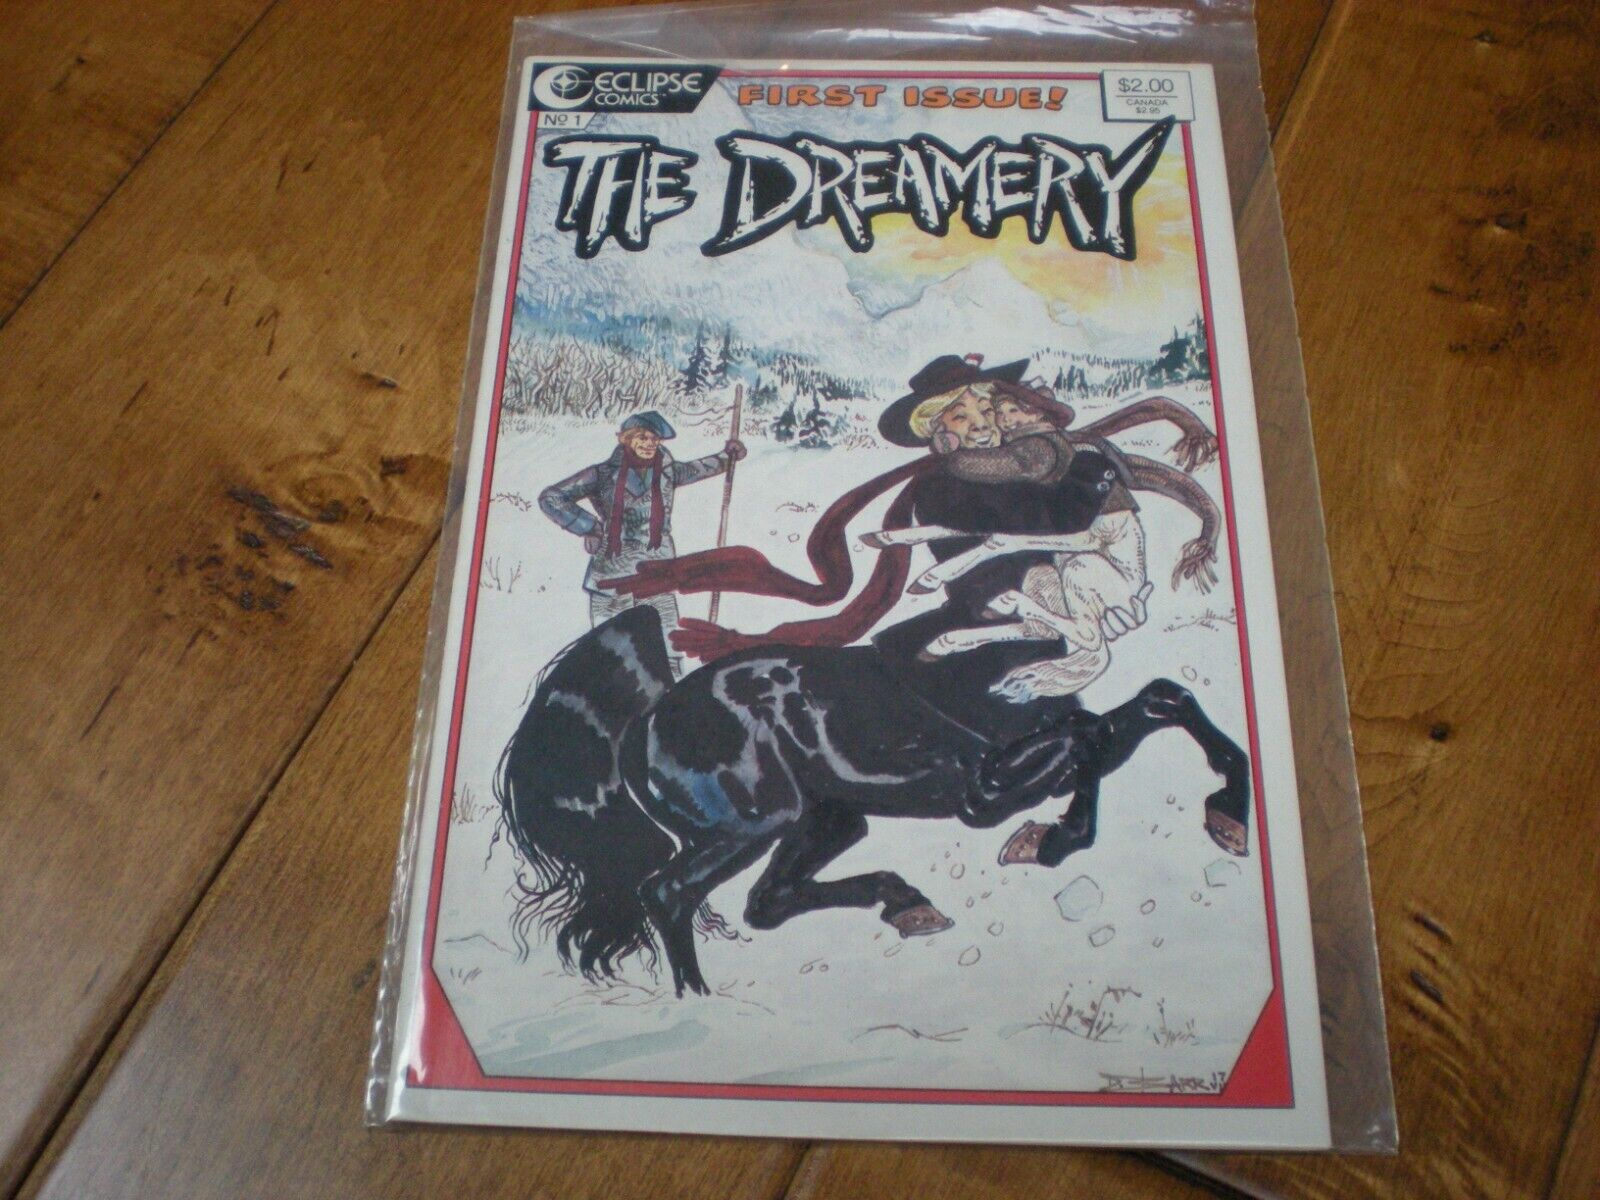 The Dreamery #1 (1986 Series) Eclipse Comics VF/NM Combined Shipping